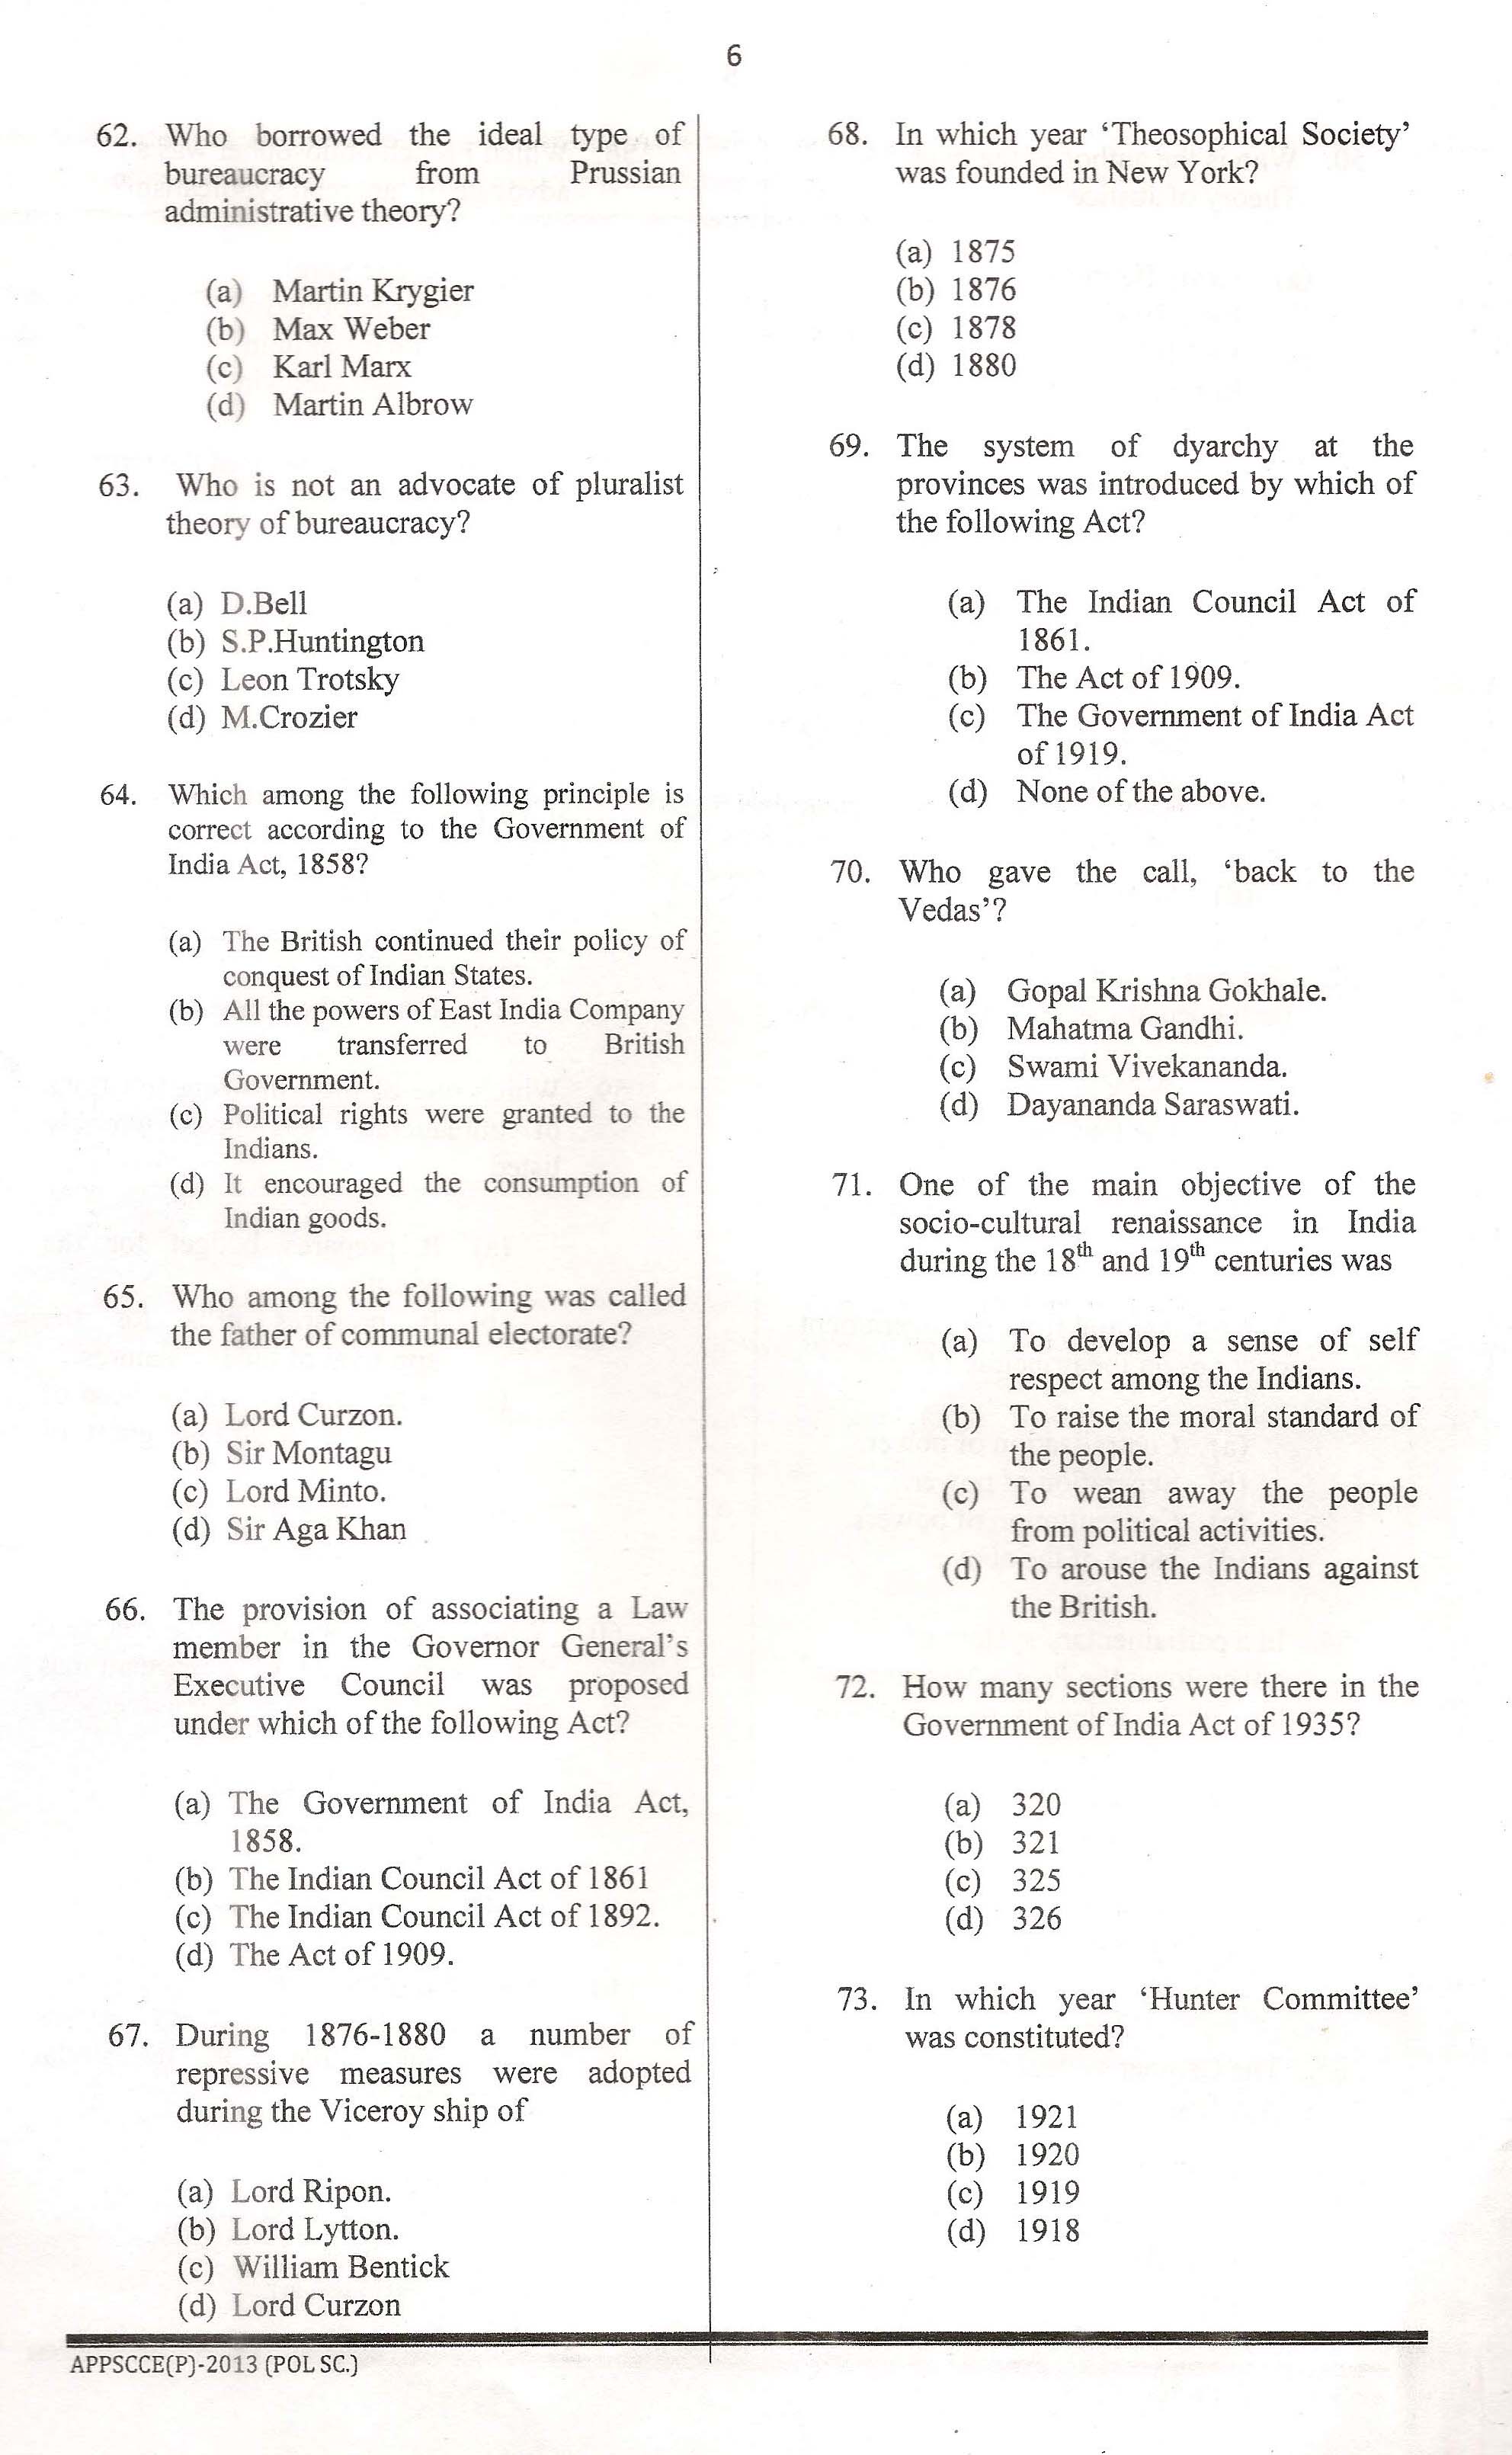 APPSC Combined Competitive Prelims Exam 2013 Political Science 7